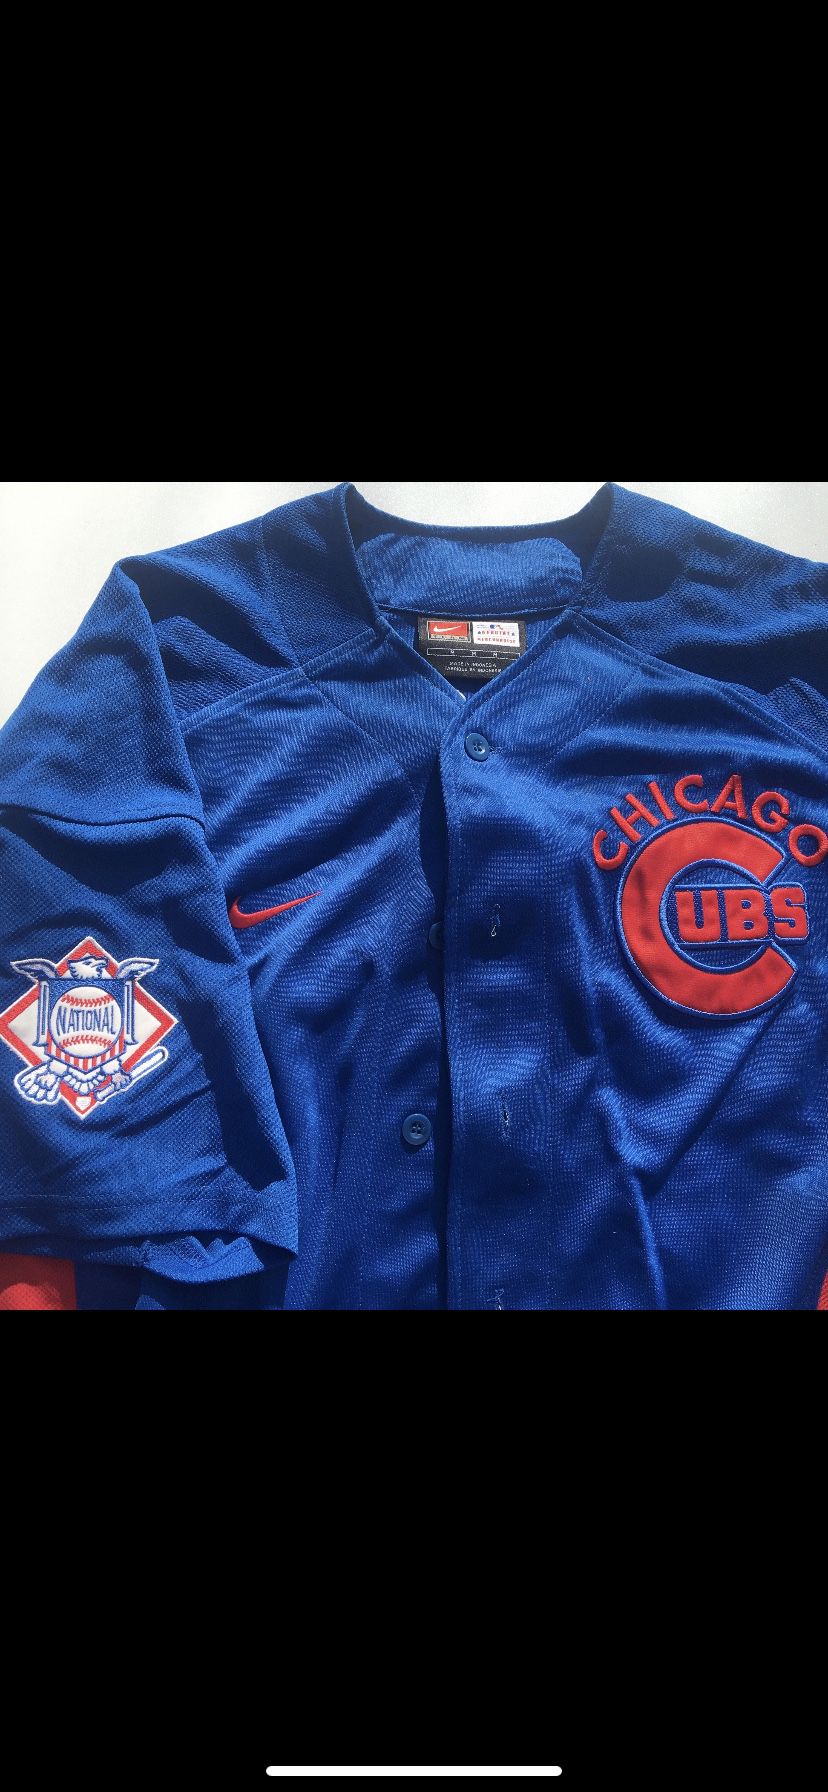 Nike, embroidered Cubs Sammy Sosa jersey size M $35